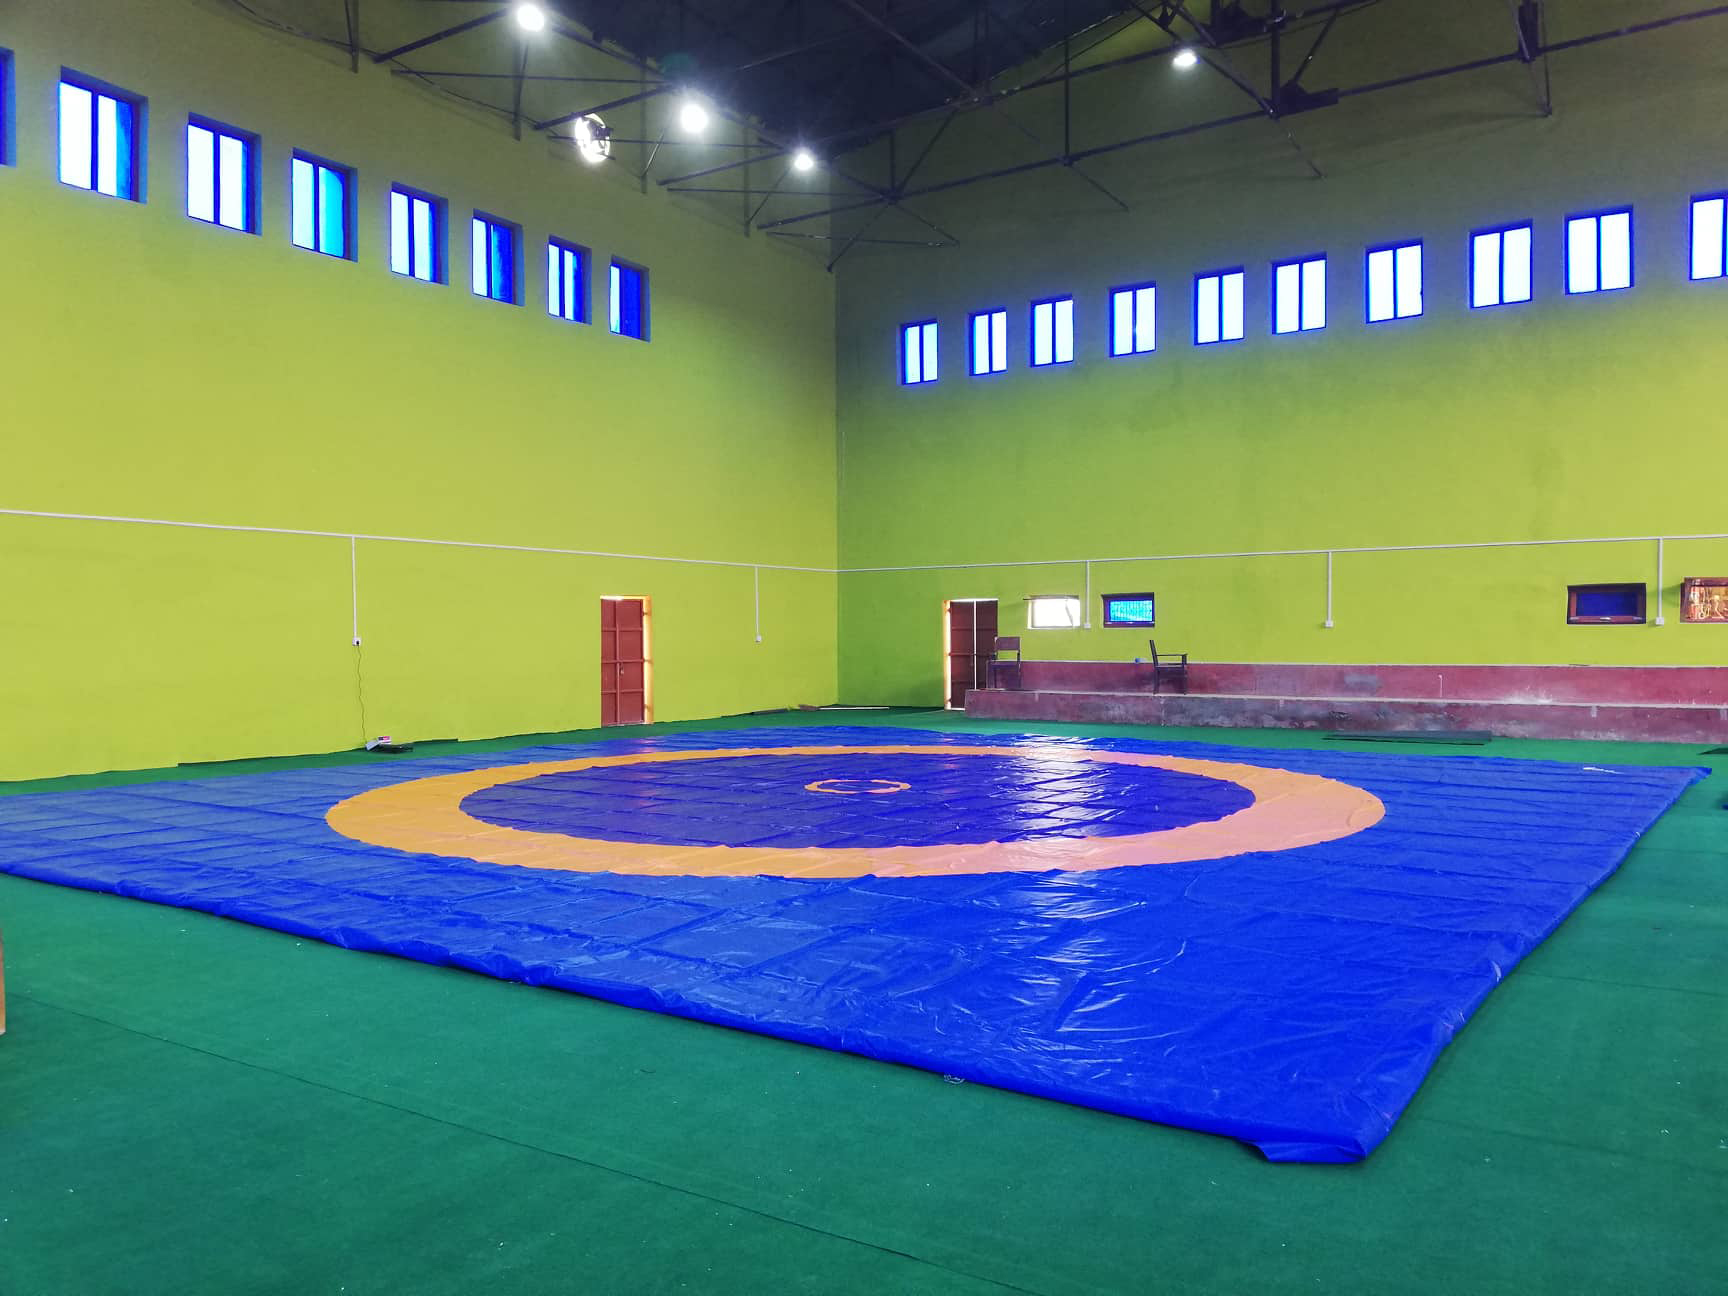 Fifteen selected for wrestling from Madhes province